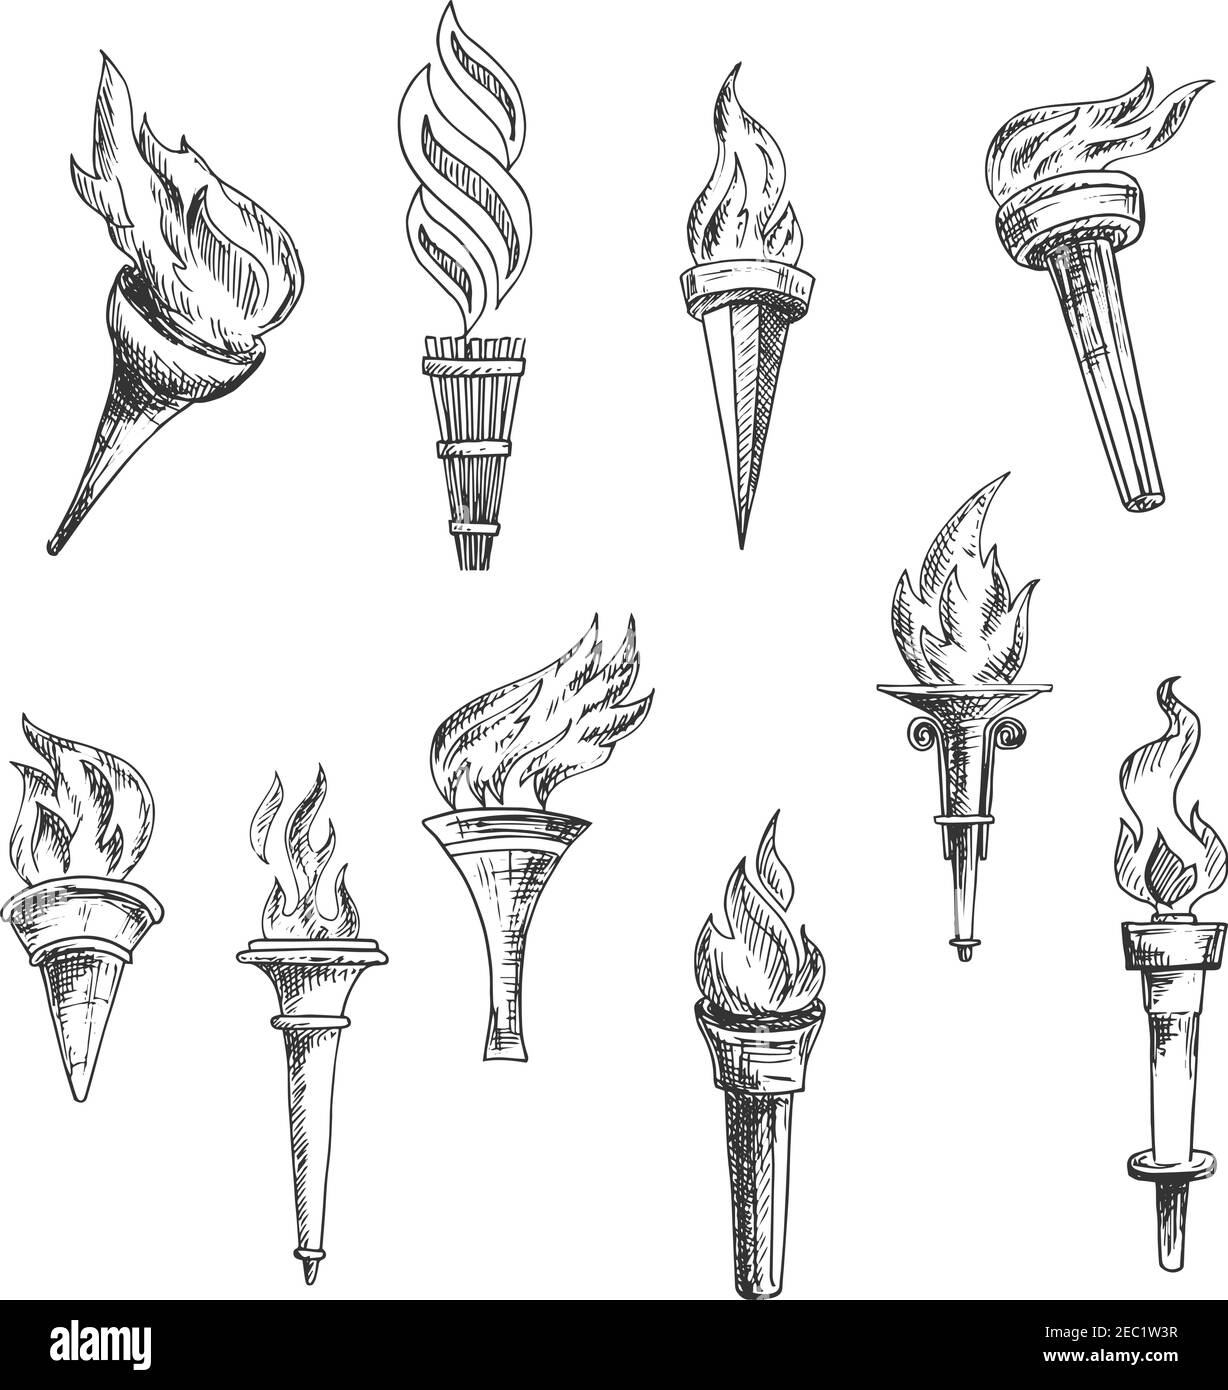 Ancient wooden torches vintage engraving sketches with ornamental swirls of burning flame. May be used as sport, religion, history or lightning equipm Stock Vector